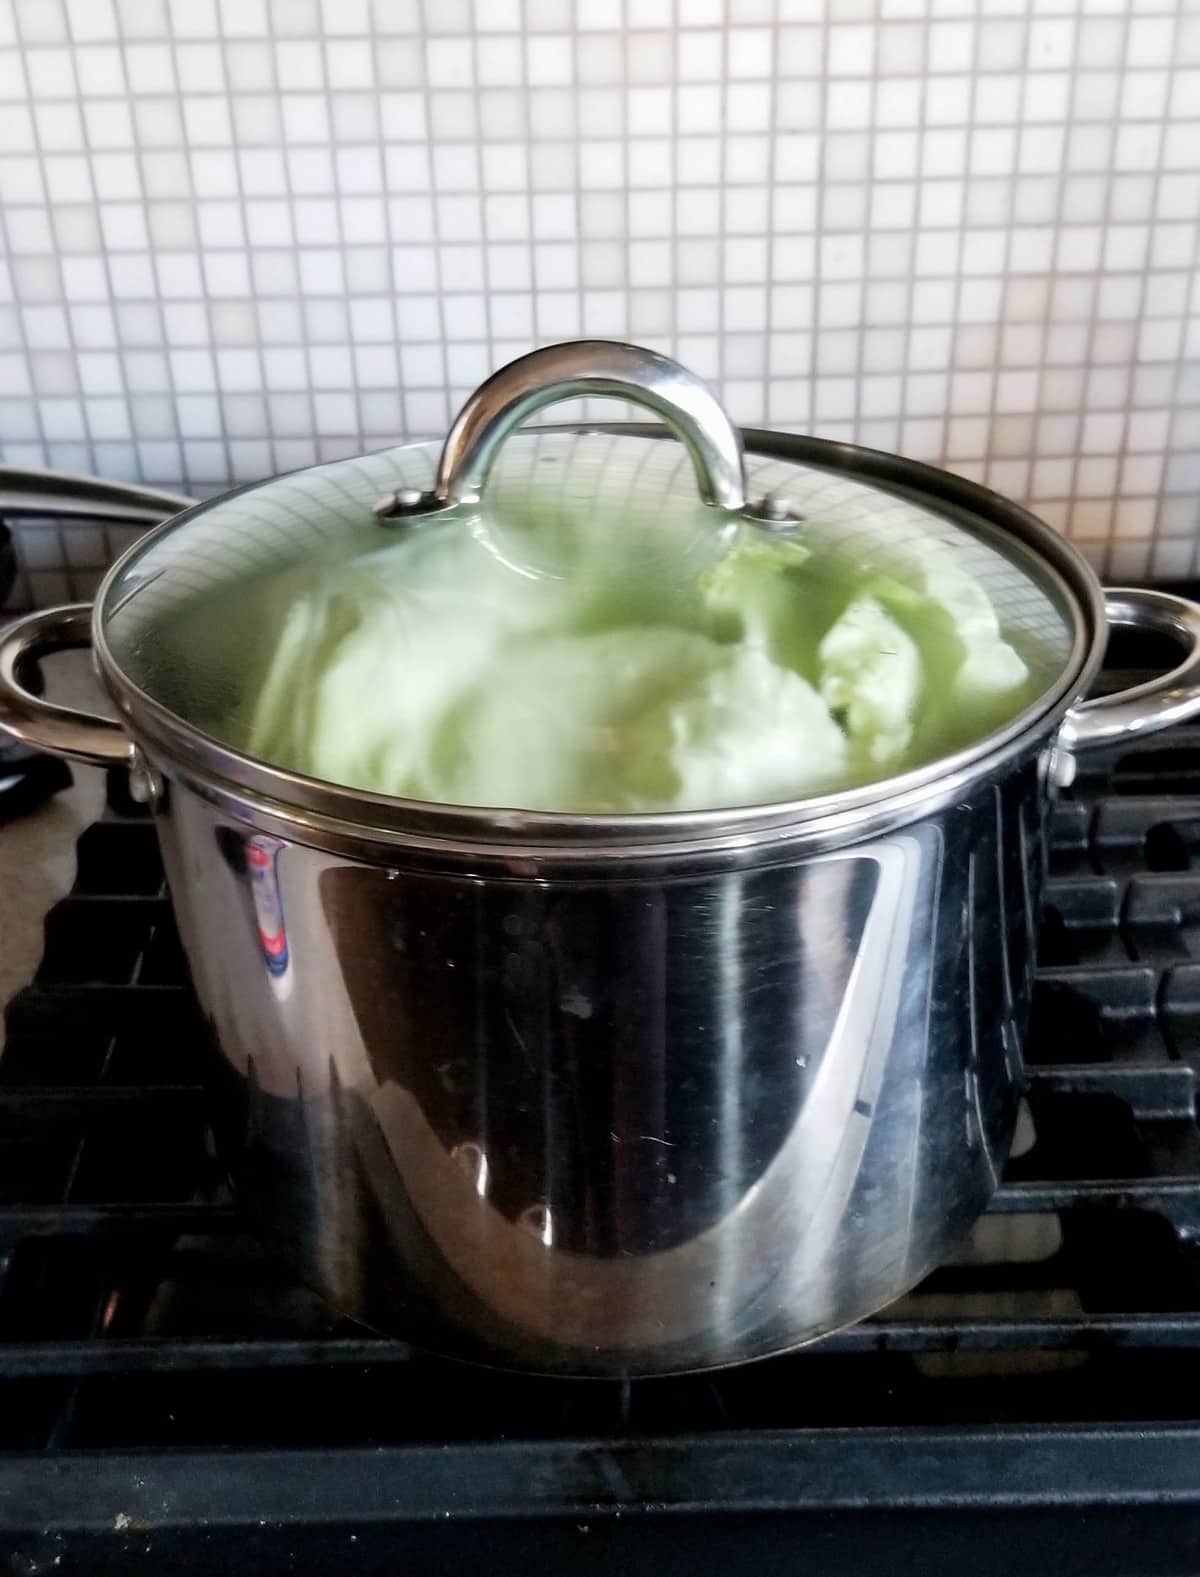 Steaming Cabbage leaves for Cabbage rolls